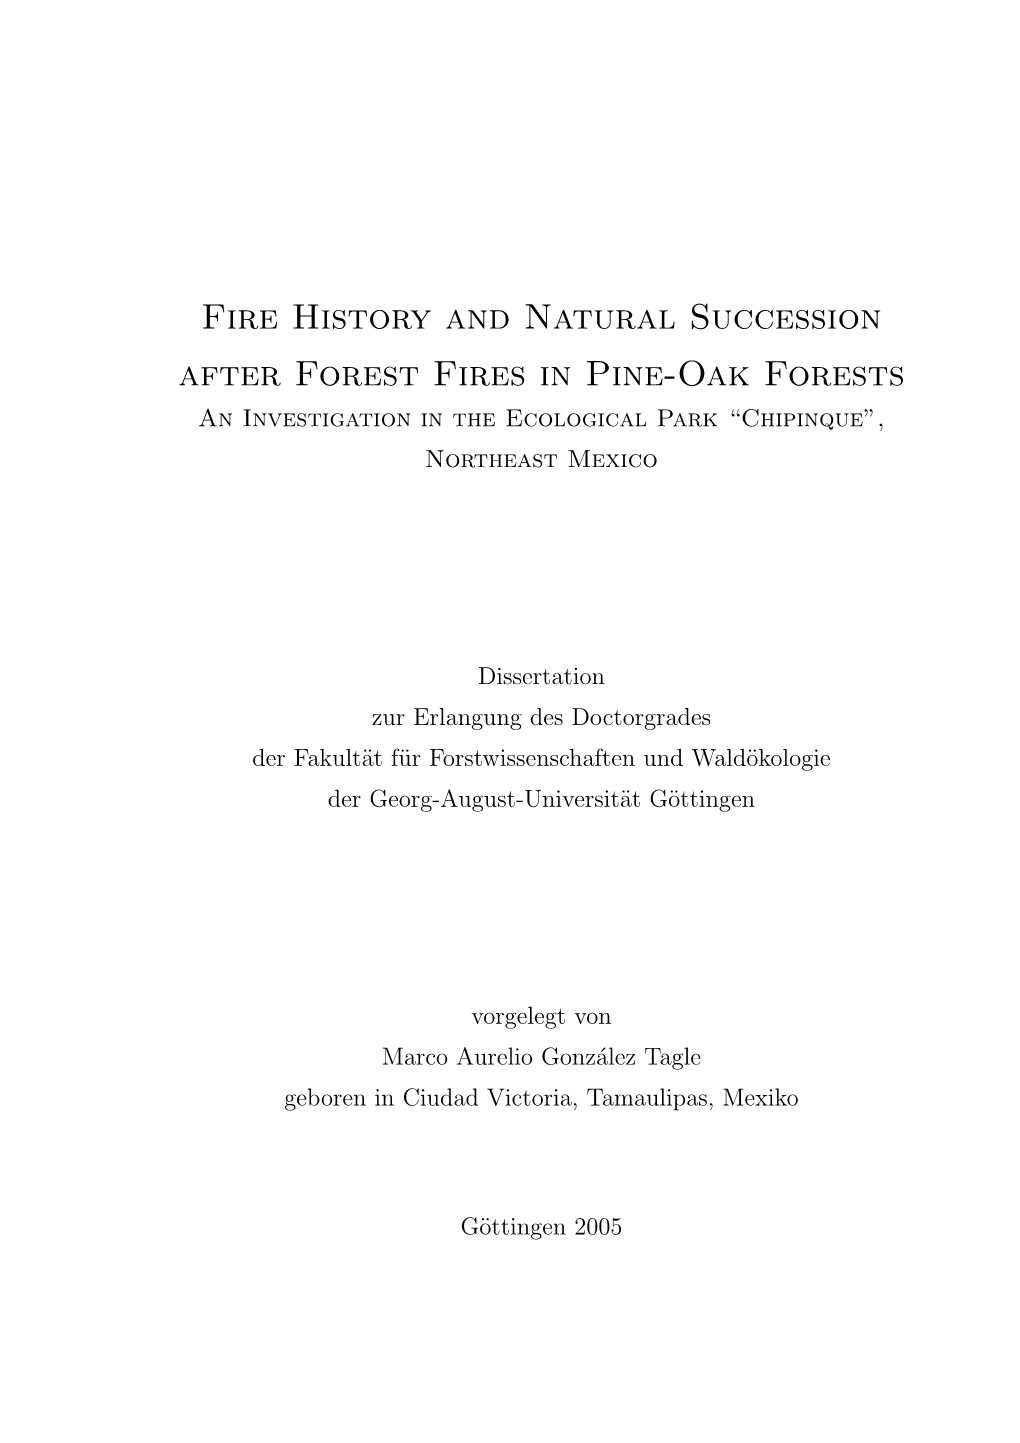 Fire History and Natural Succession After Forest Fires in Pine-Oak Forests an Investigation in the Ecological Park “Chipinque”, Northeast Mexico